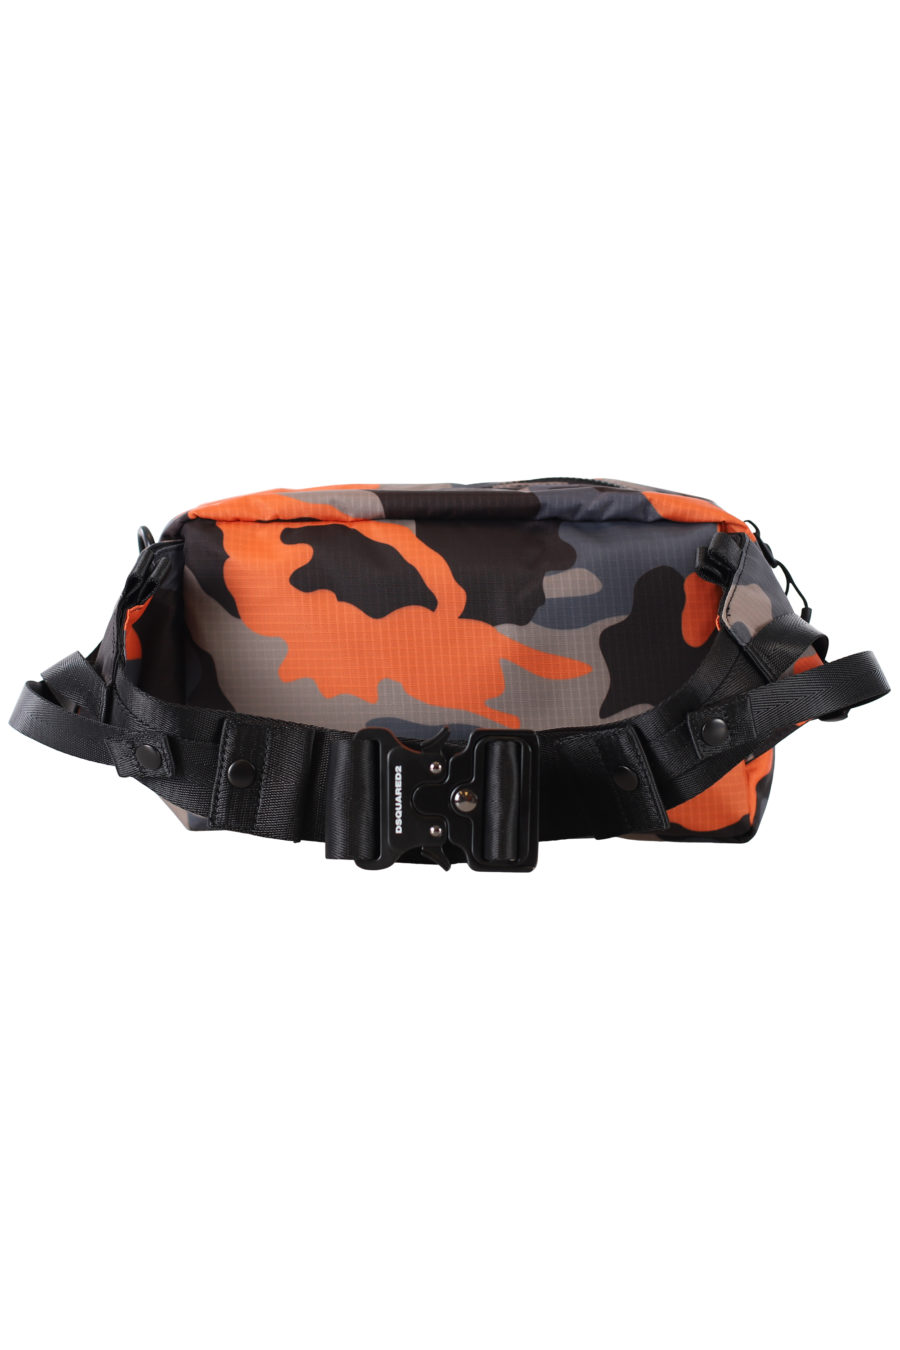 Crossbody briefcase with orange camouflage and ceresio logo - IMG 2282